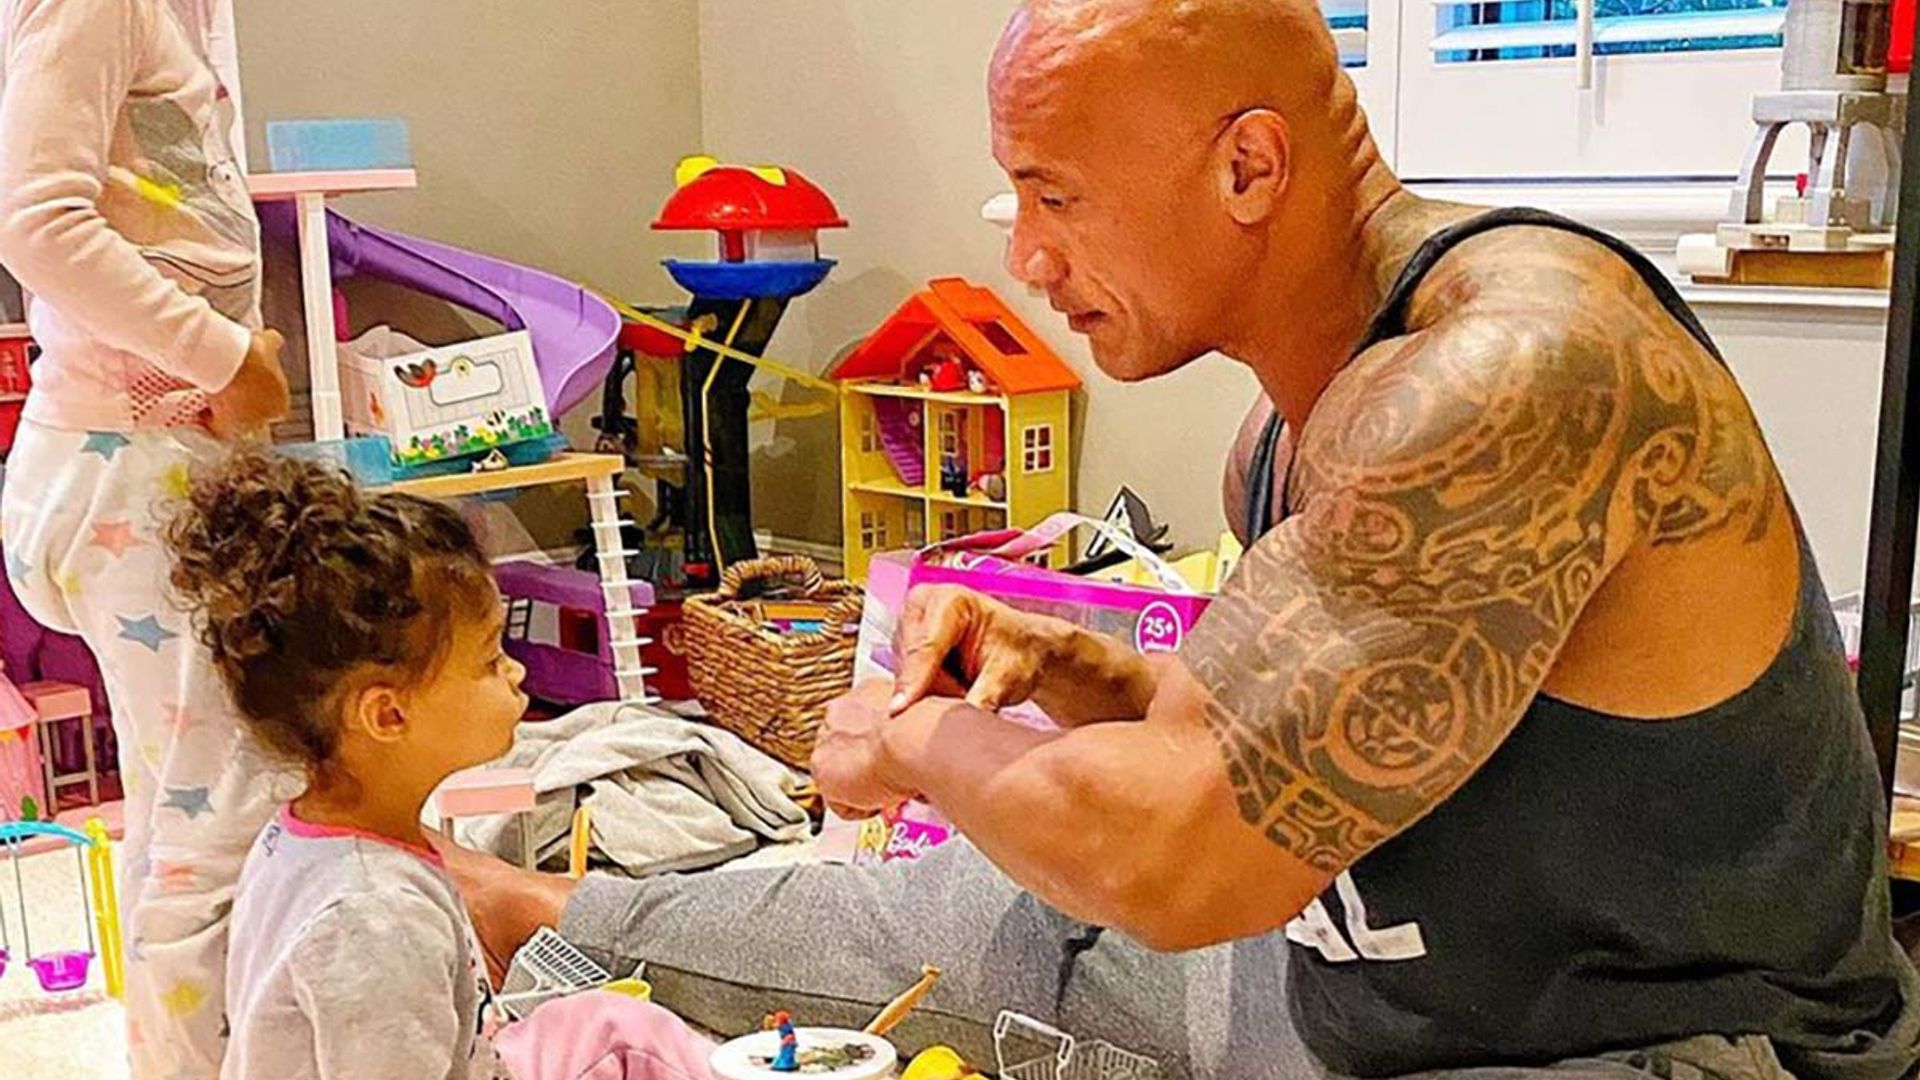 Dwayne The Rock Johnson S Daughter Tiana Has The Best Reaction To Dad S Appearance Hello